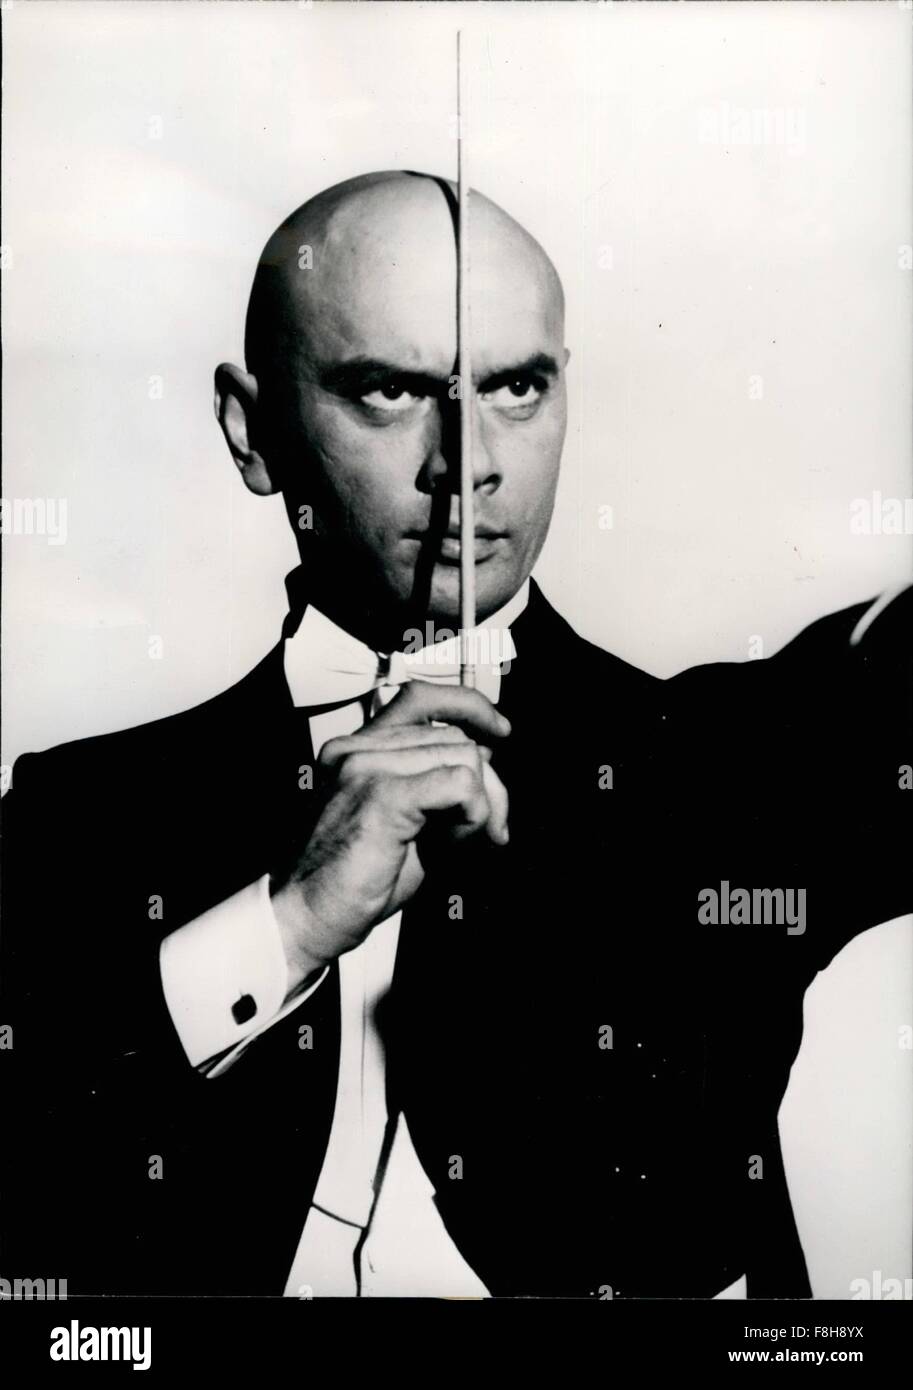 1962 - Yul Brynner as a Conductor: The Famous American Actor, Yul Brynner is in Paris now for the Filming of ''Once mre with Feeling'', produced and directed by Stanley Donen. In this Film, Yul Brynner plays the part of a famous conductor. Photo shows Yul Brynner in a scene of the film. © Keystone Pictures USA/ZUMAPRESS.com/Alamy Live News Stock Photo